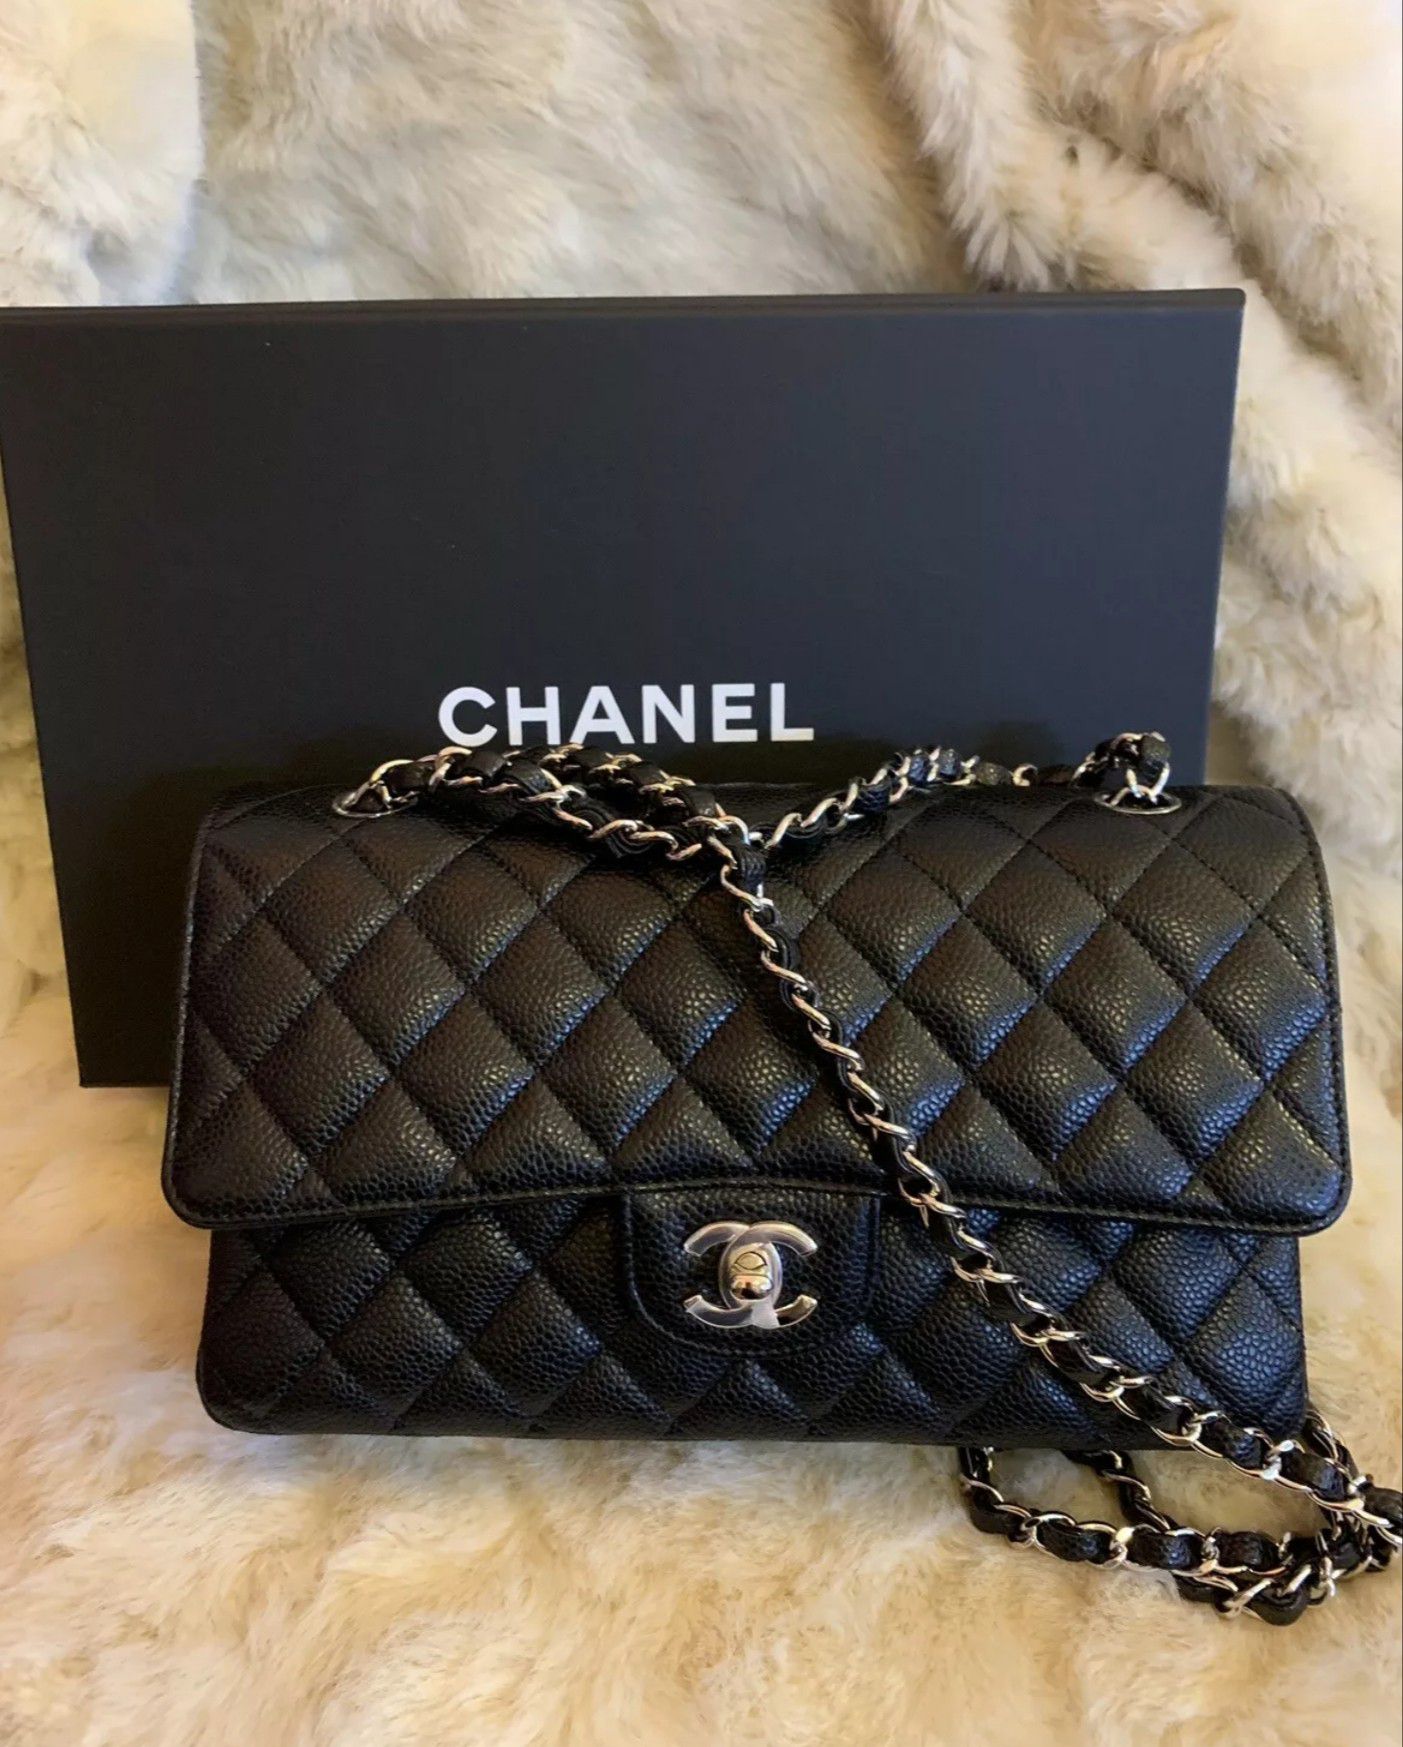 Chanel Classic Med Flap Purse Bag with Authenticity Certificate